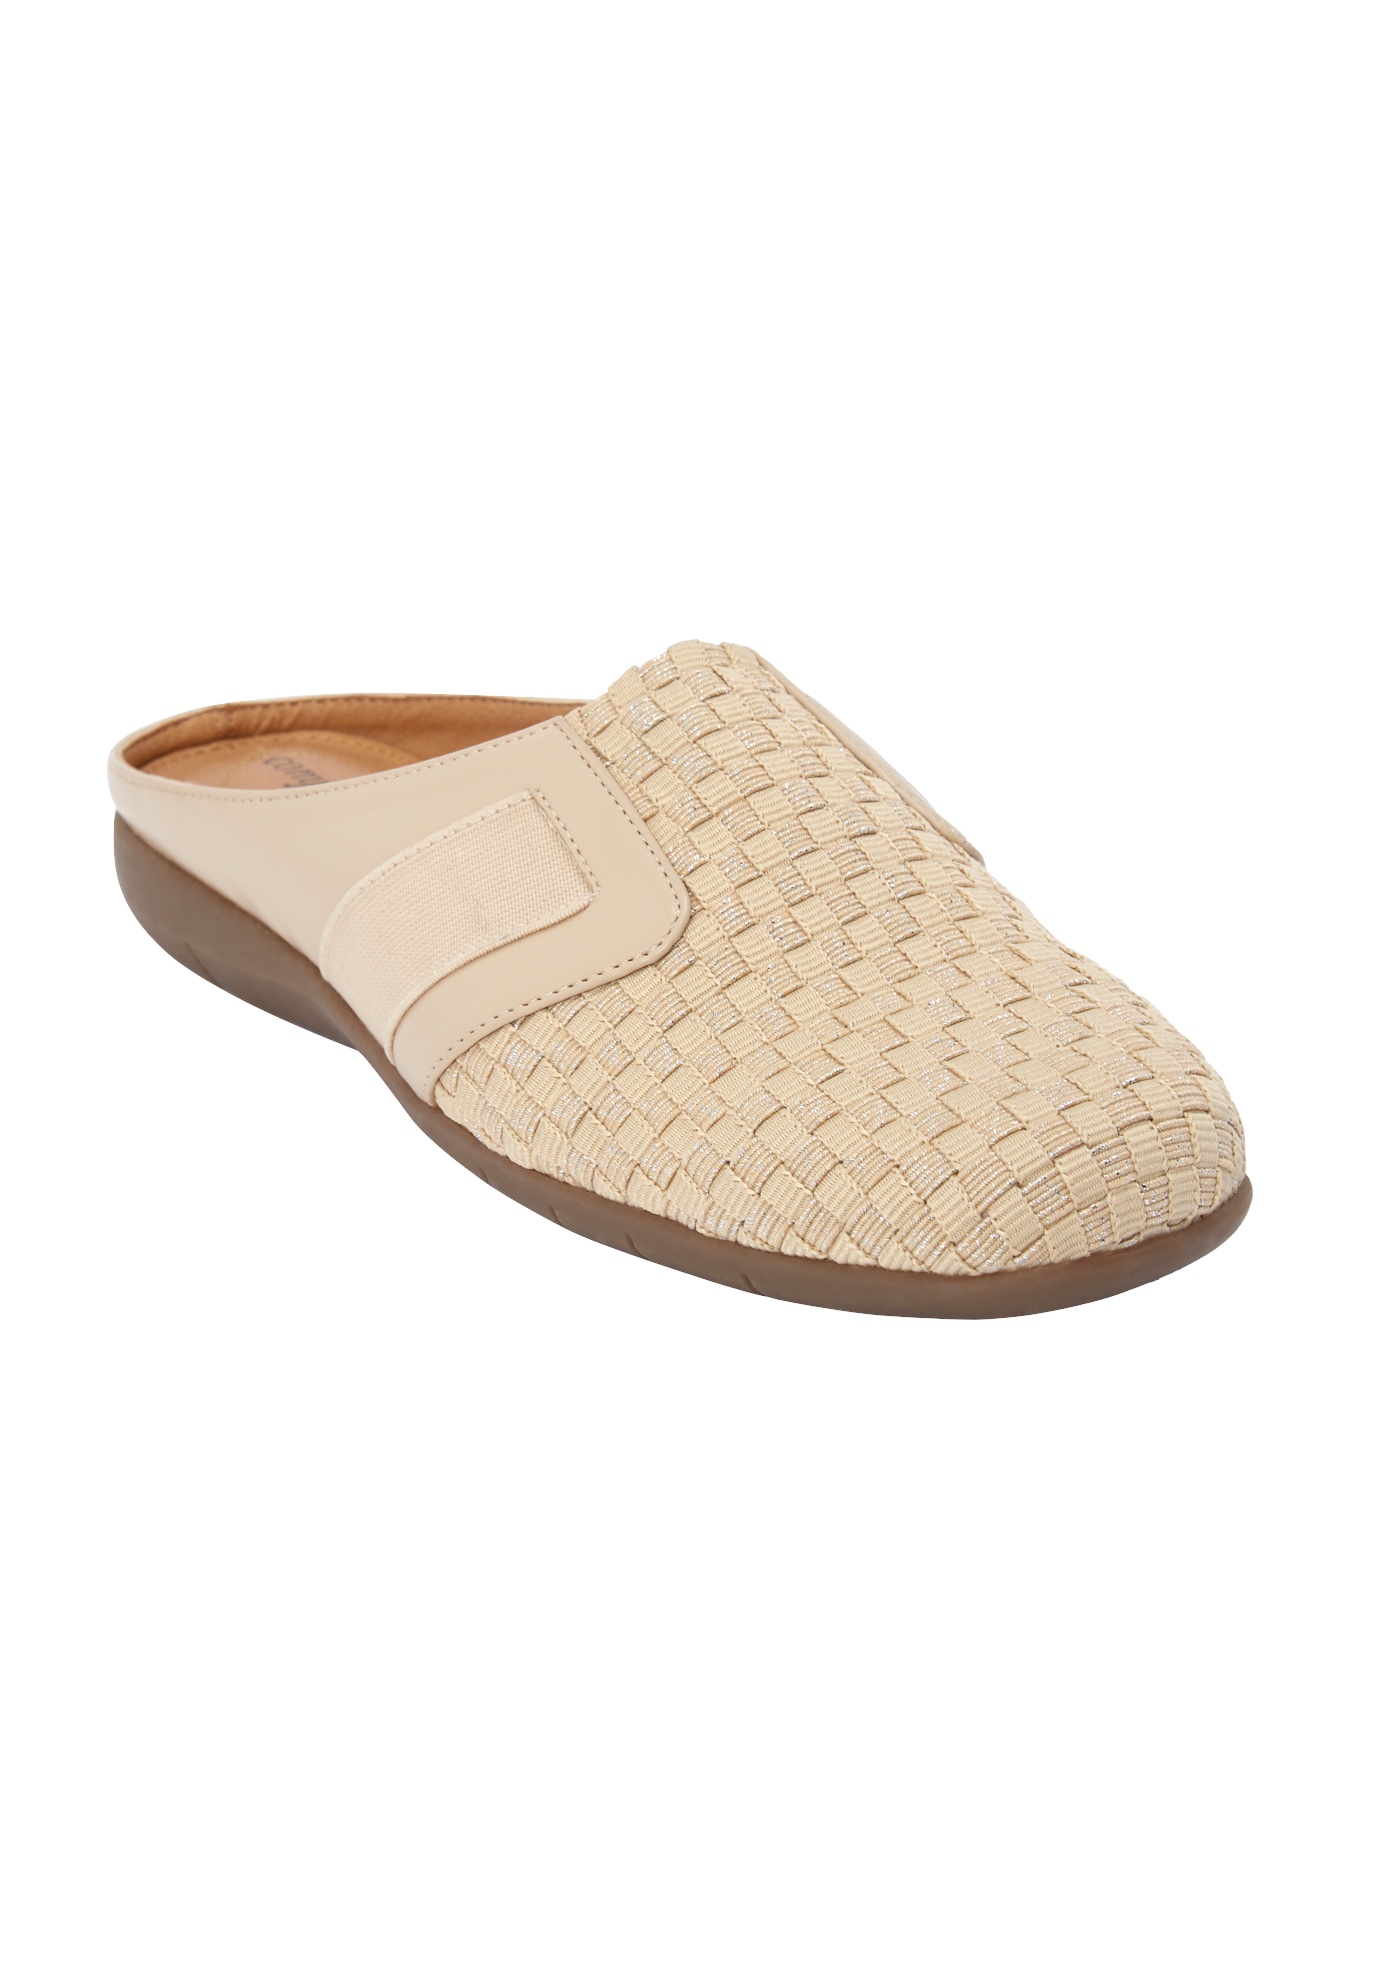 Comfortview Women's Wide Width The Lola Mule Shoes - image 1 of 7